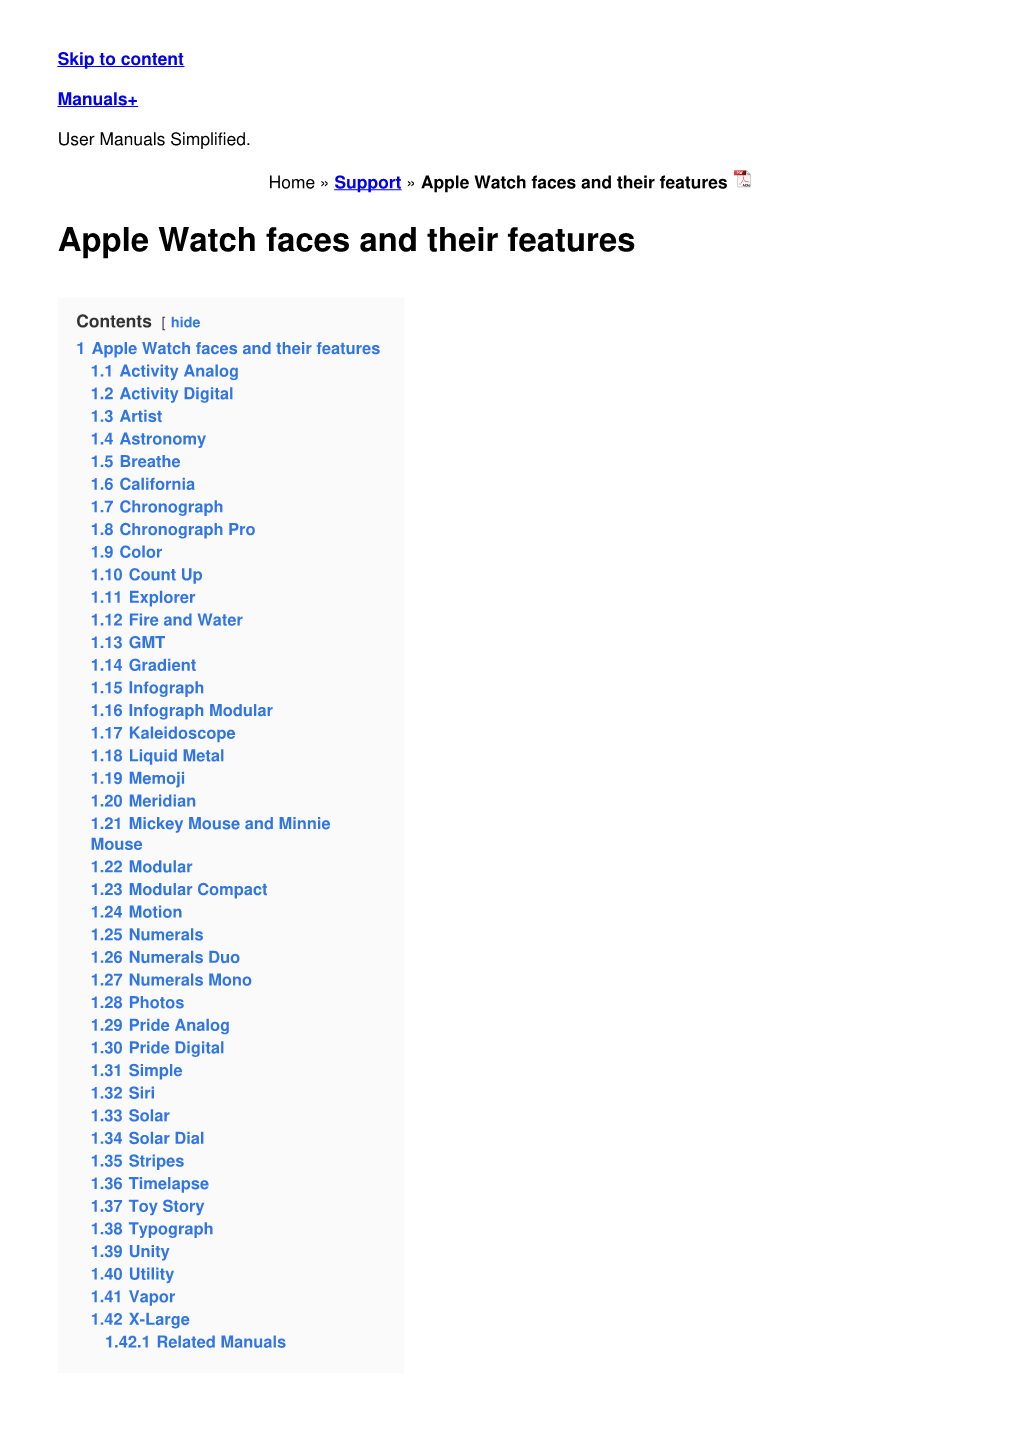 Apple Watch Faces and Their Features